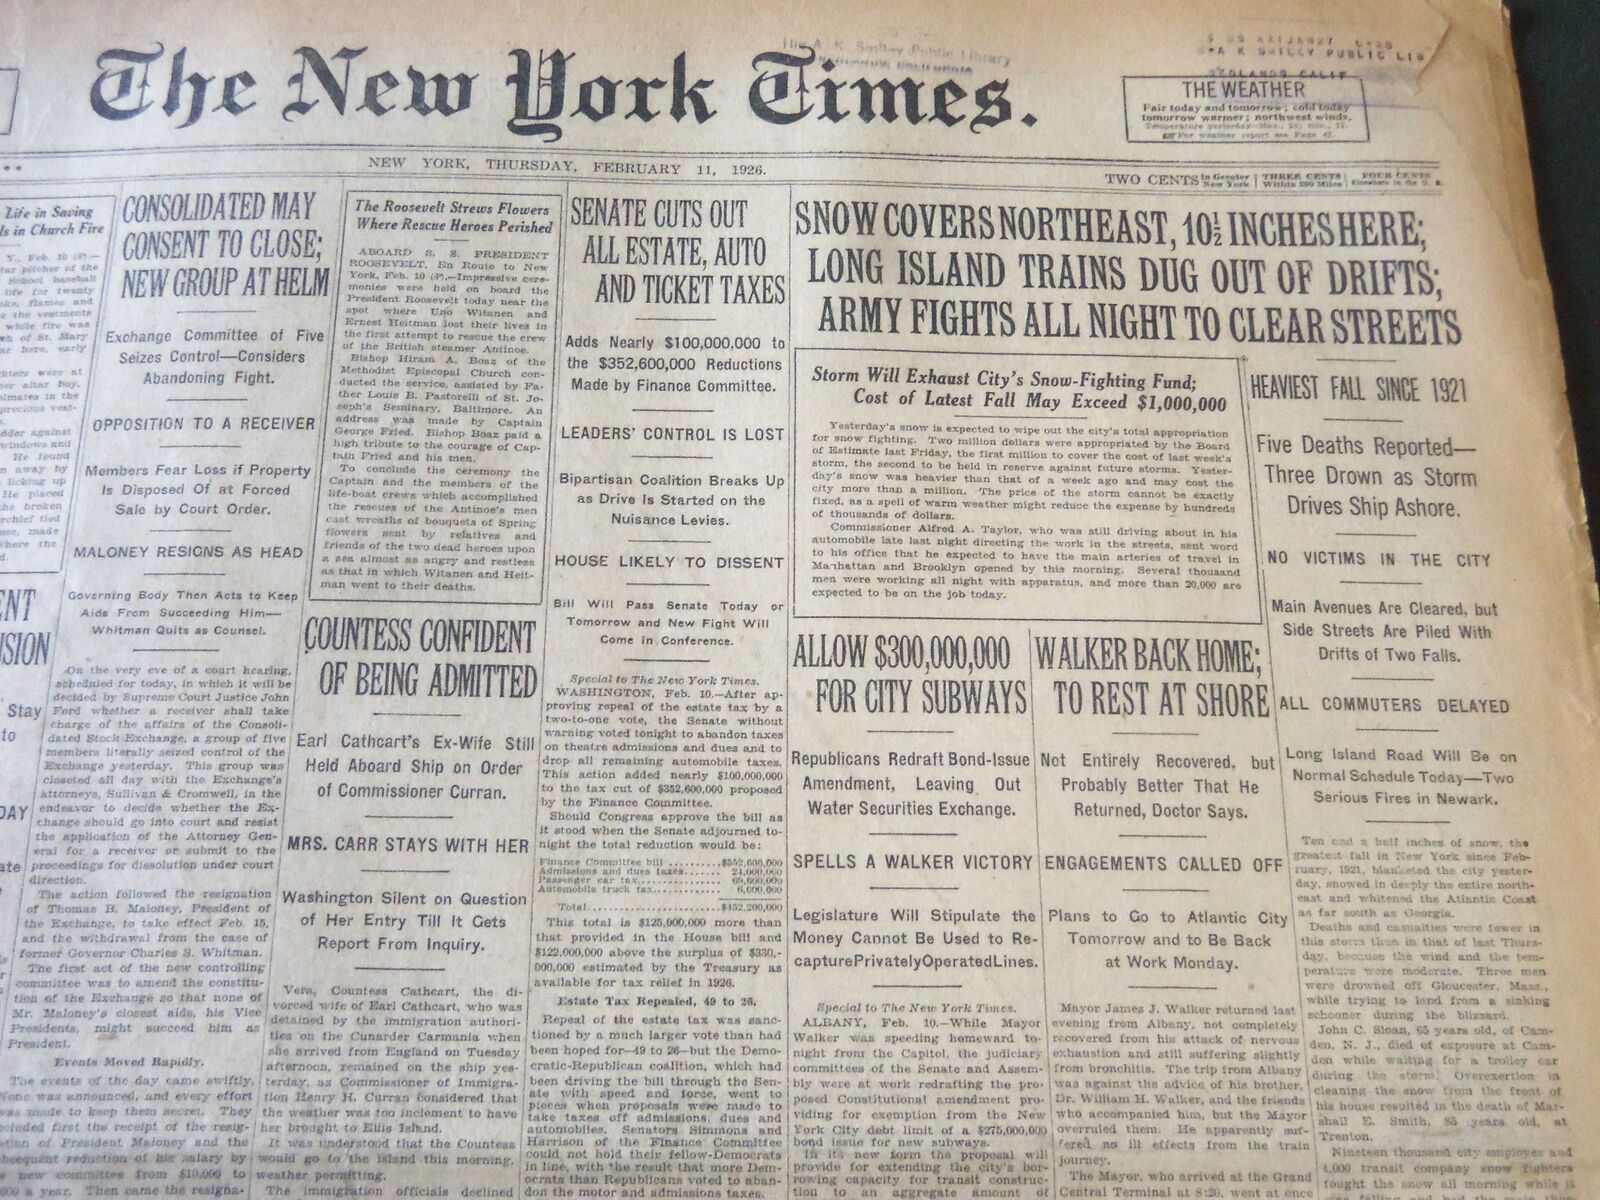 1926 FEB 11 NEW YORK TIMES - SNOW COVERS NORTHEAST 10 1/2 INCHES HERE - NT 6606